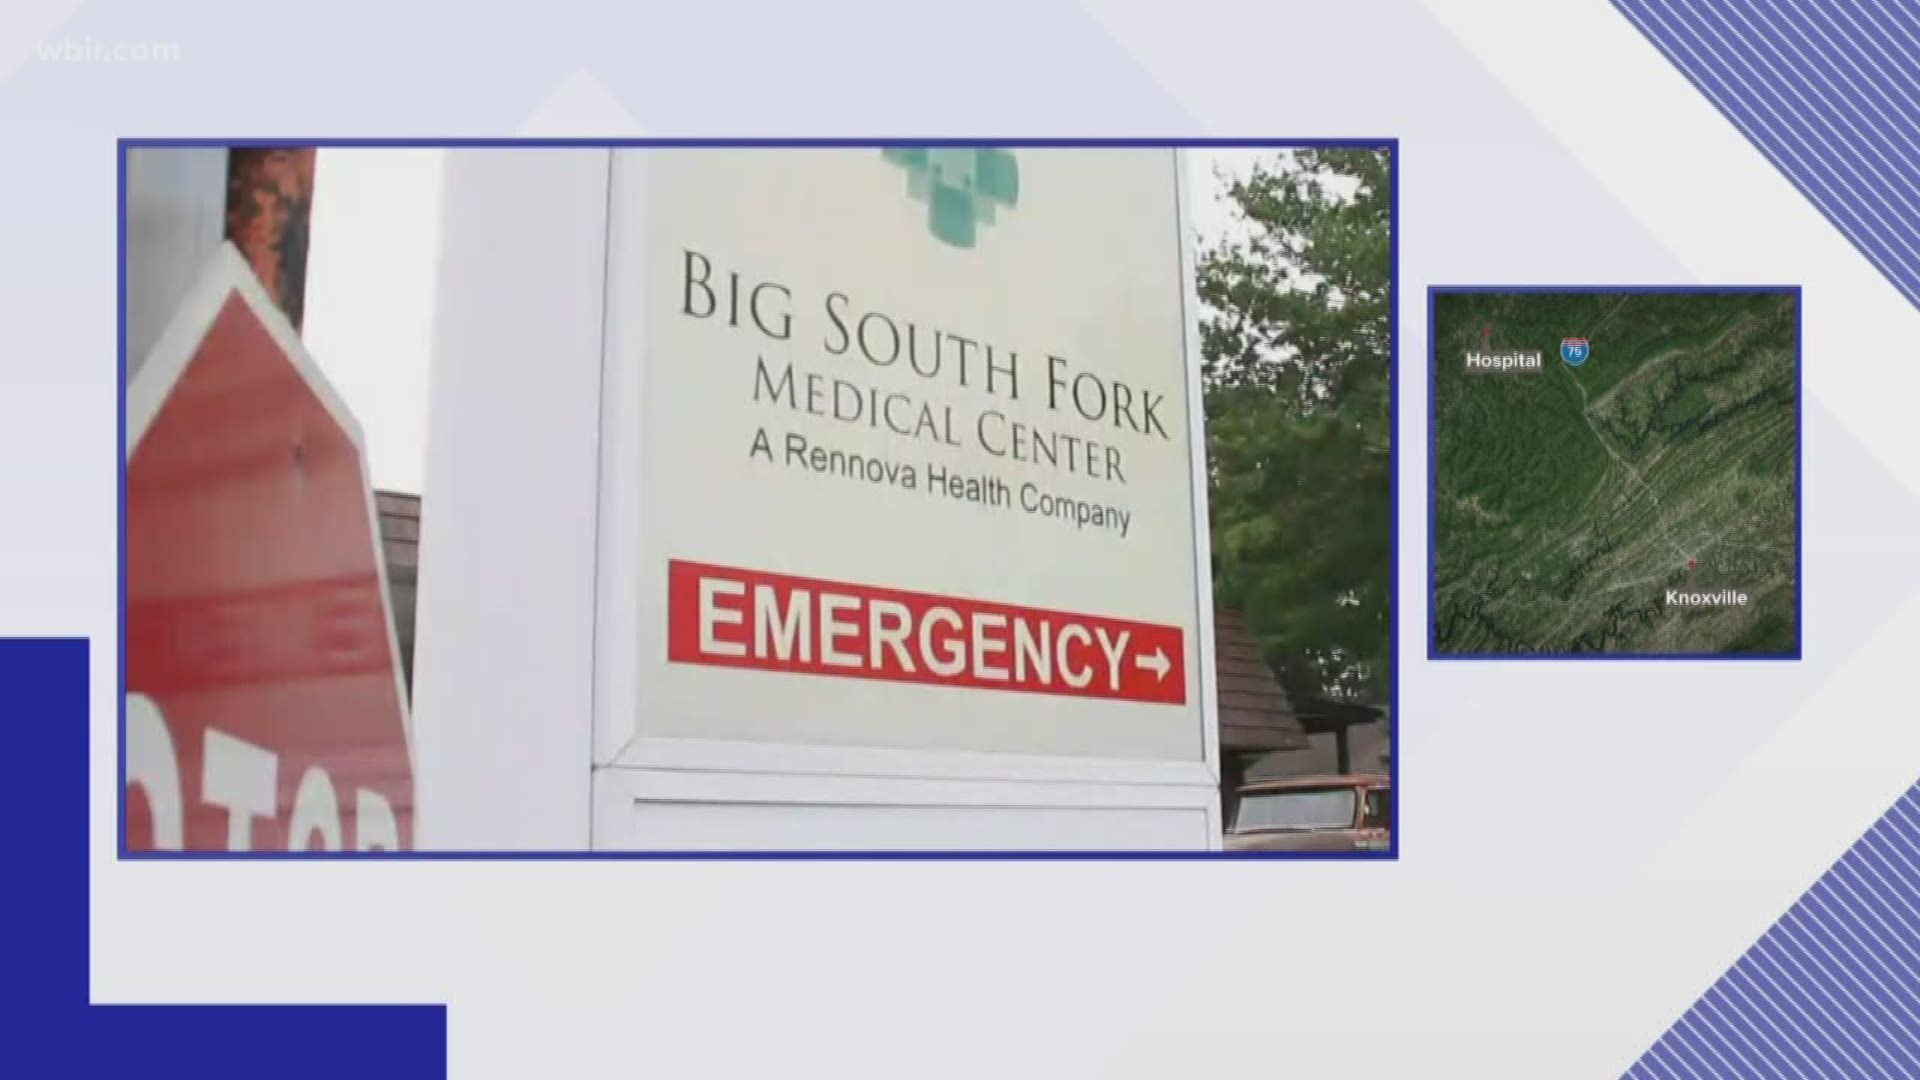 Senator Marsha Blackburn said an investigation is warranted after a 10News report into operations at Oneida's Big South Fork Medical Center.